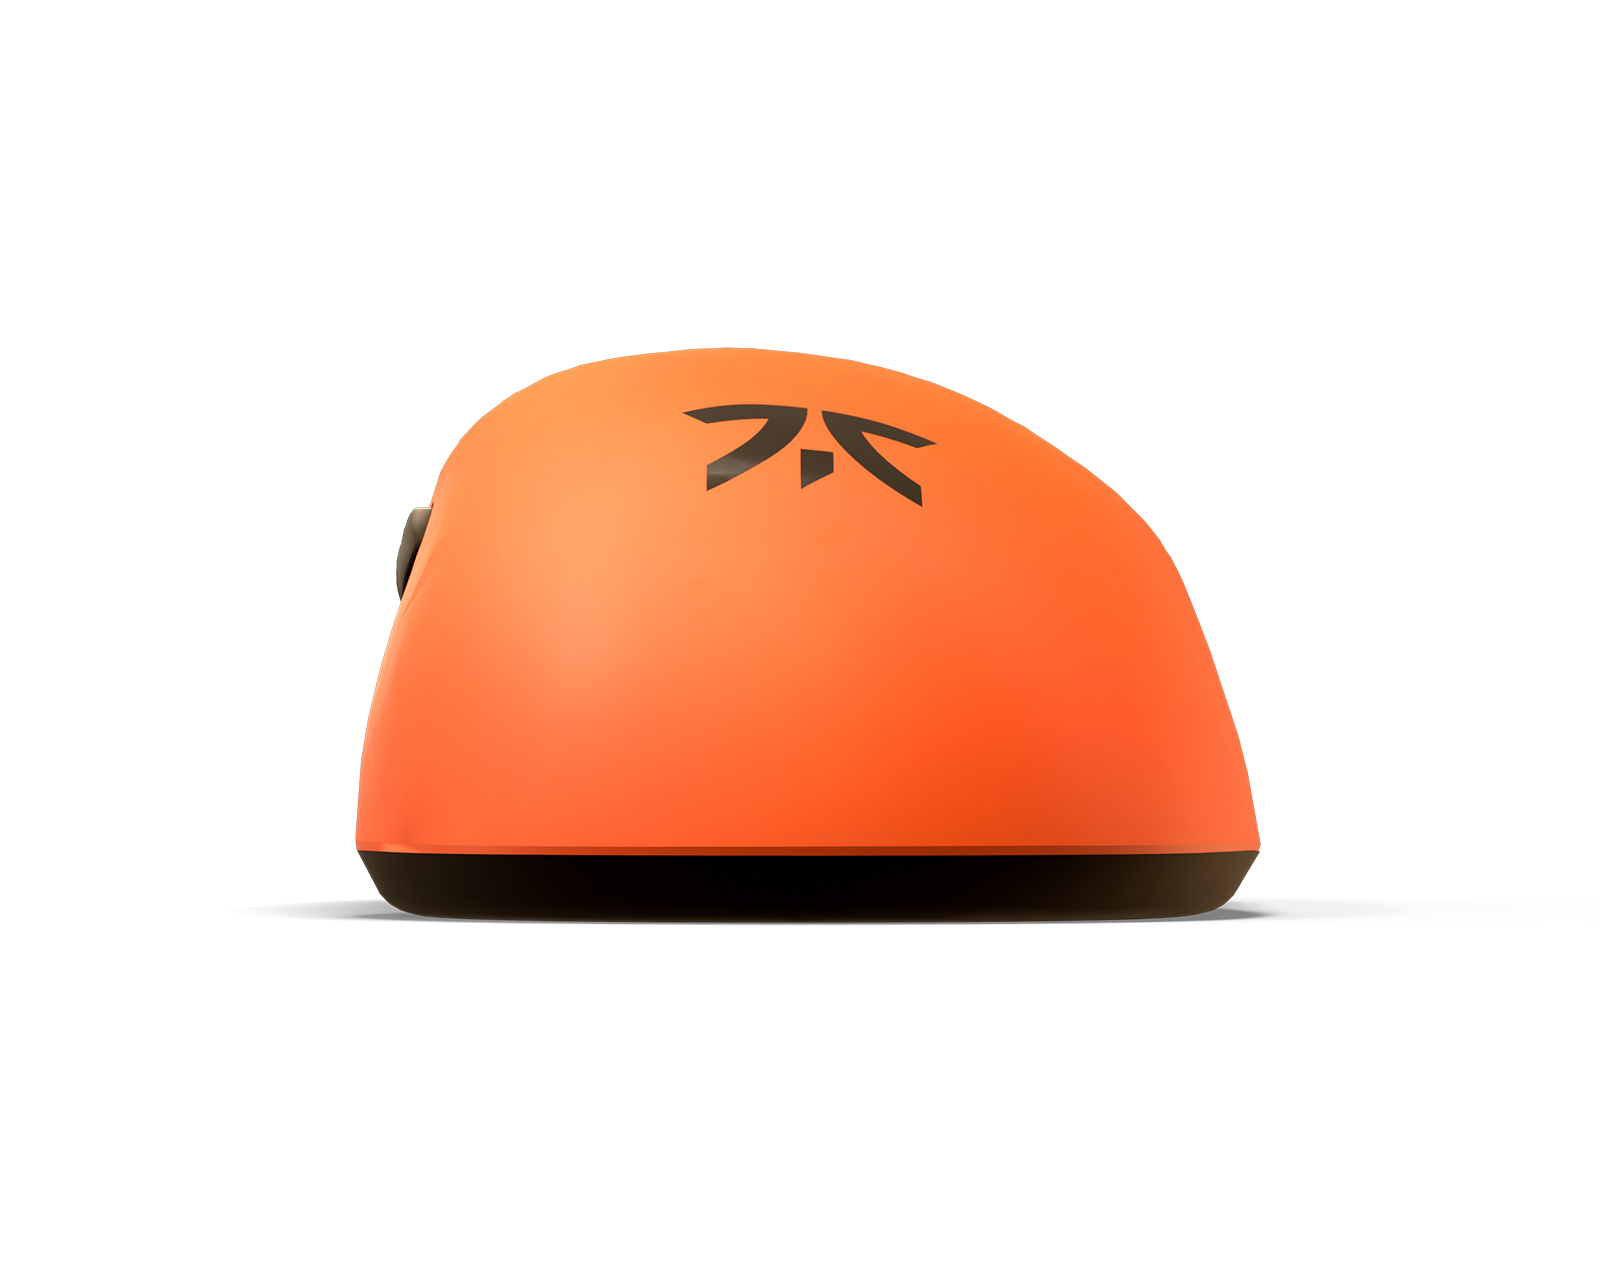 Fnatic x Lamzu Thorn Wireless Superlight Gaming Mouse Limited